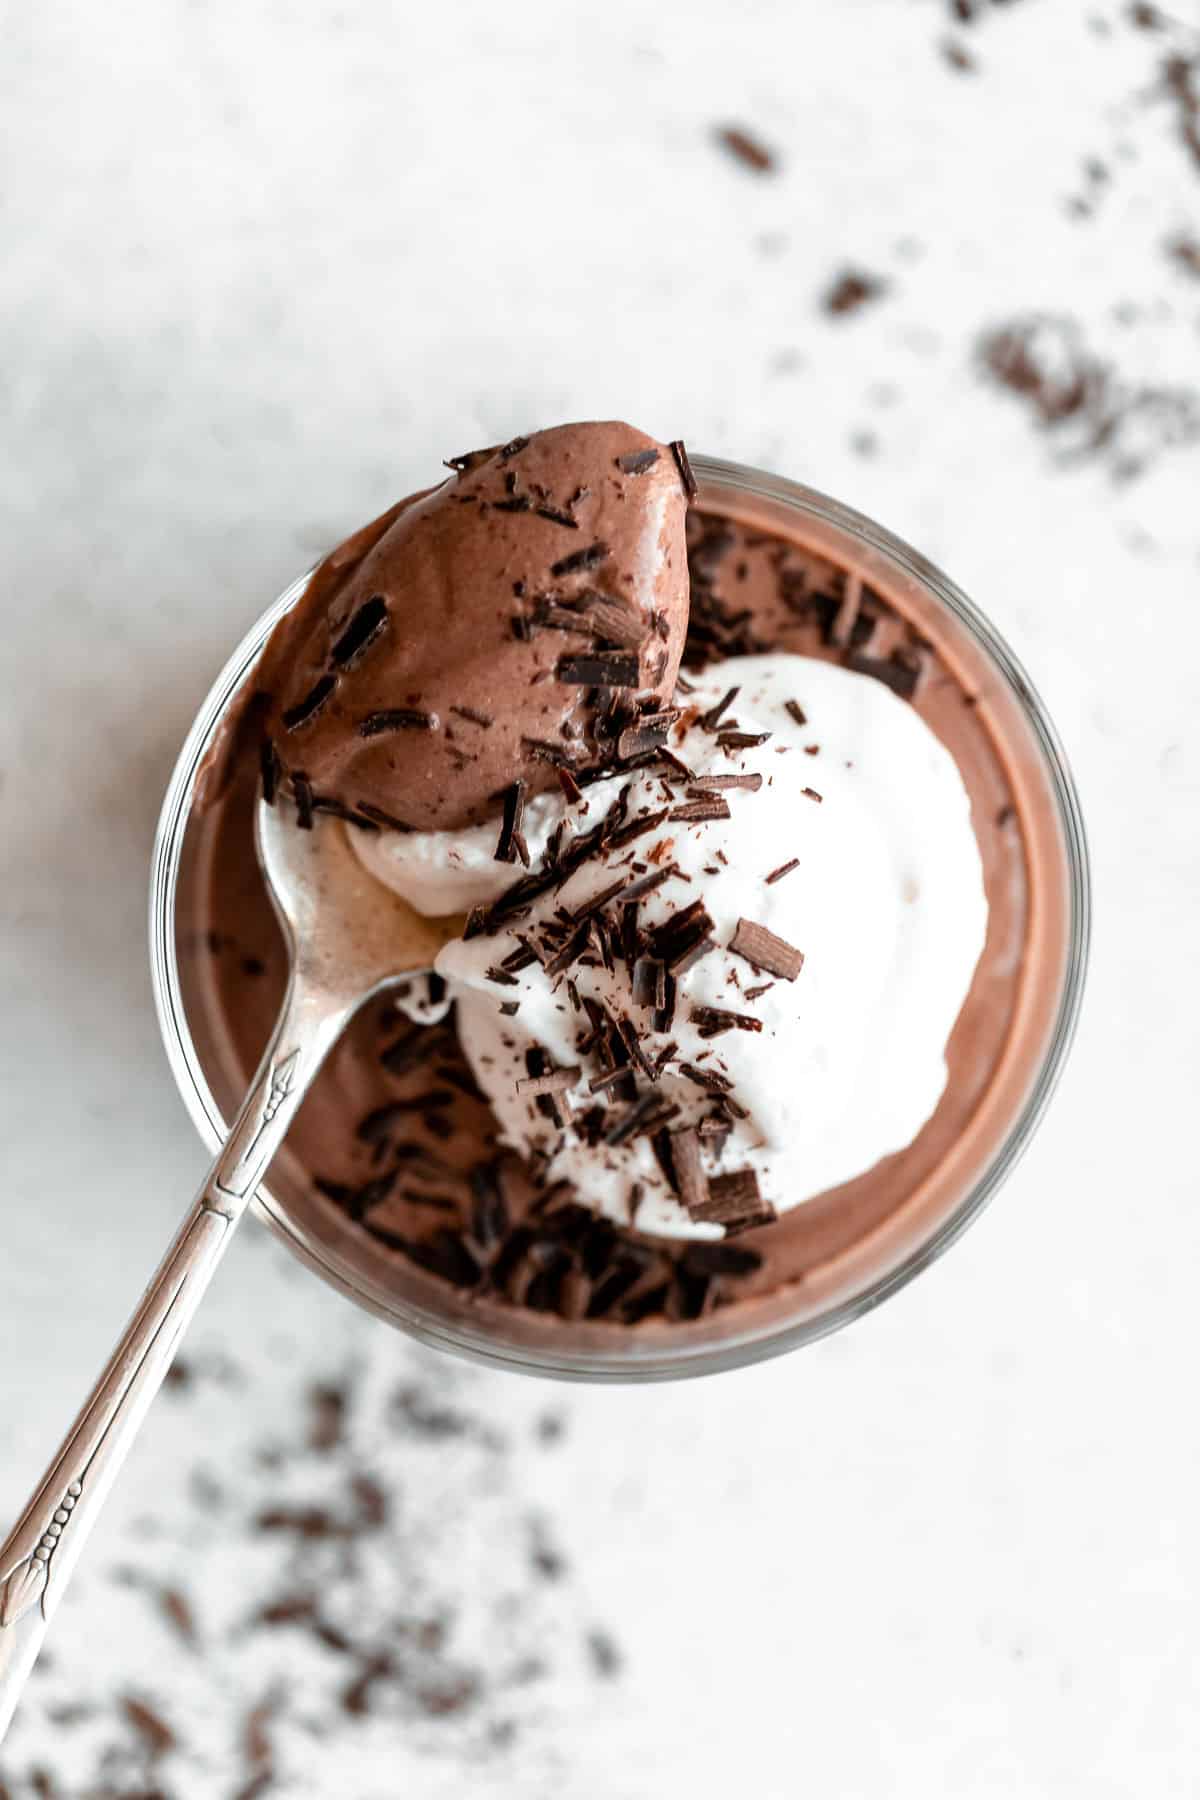 mousse in a container with chocolate shavings on top